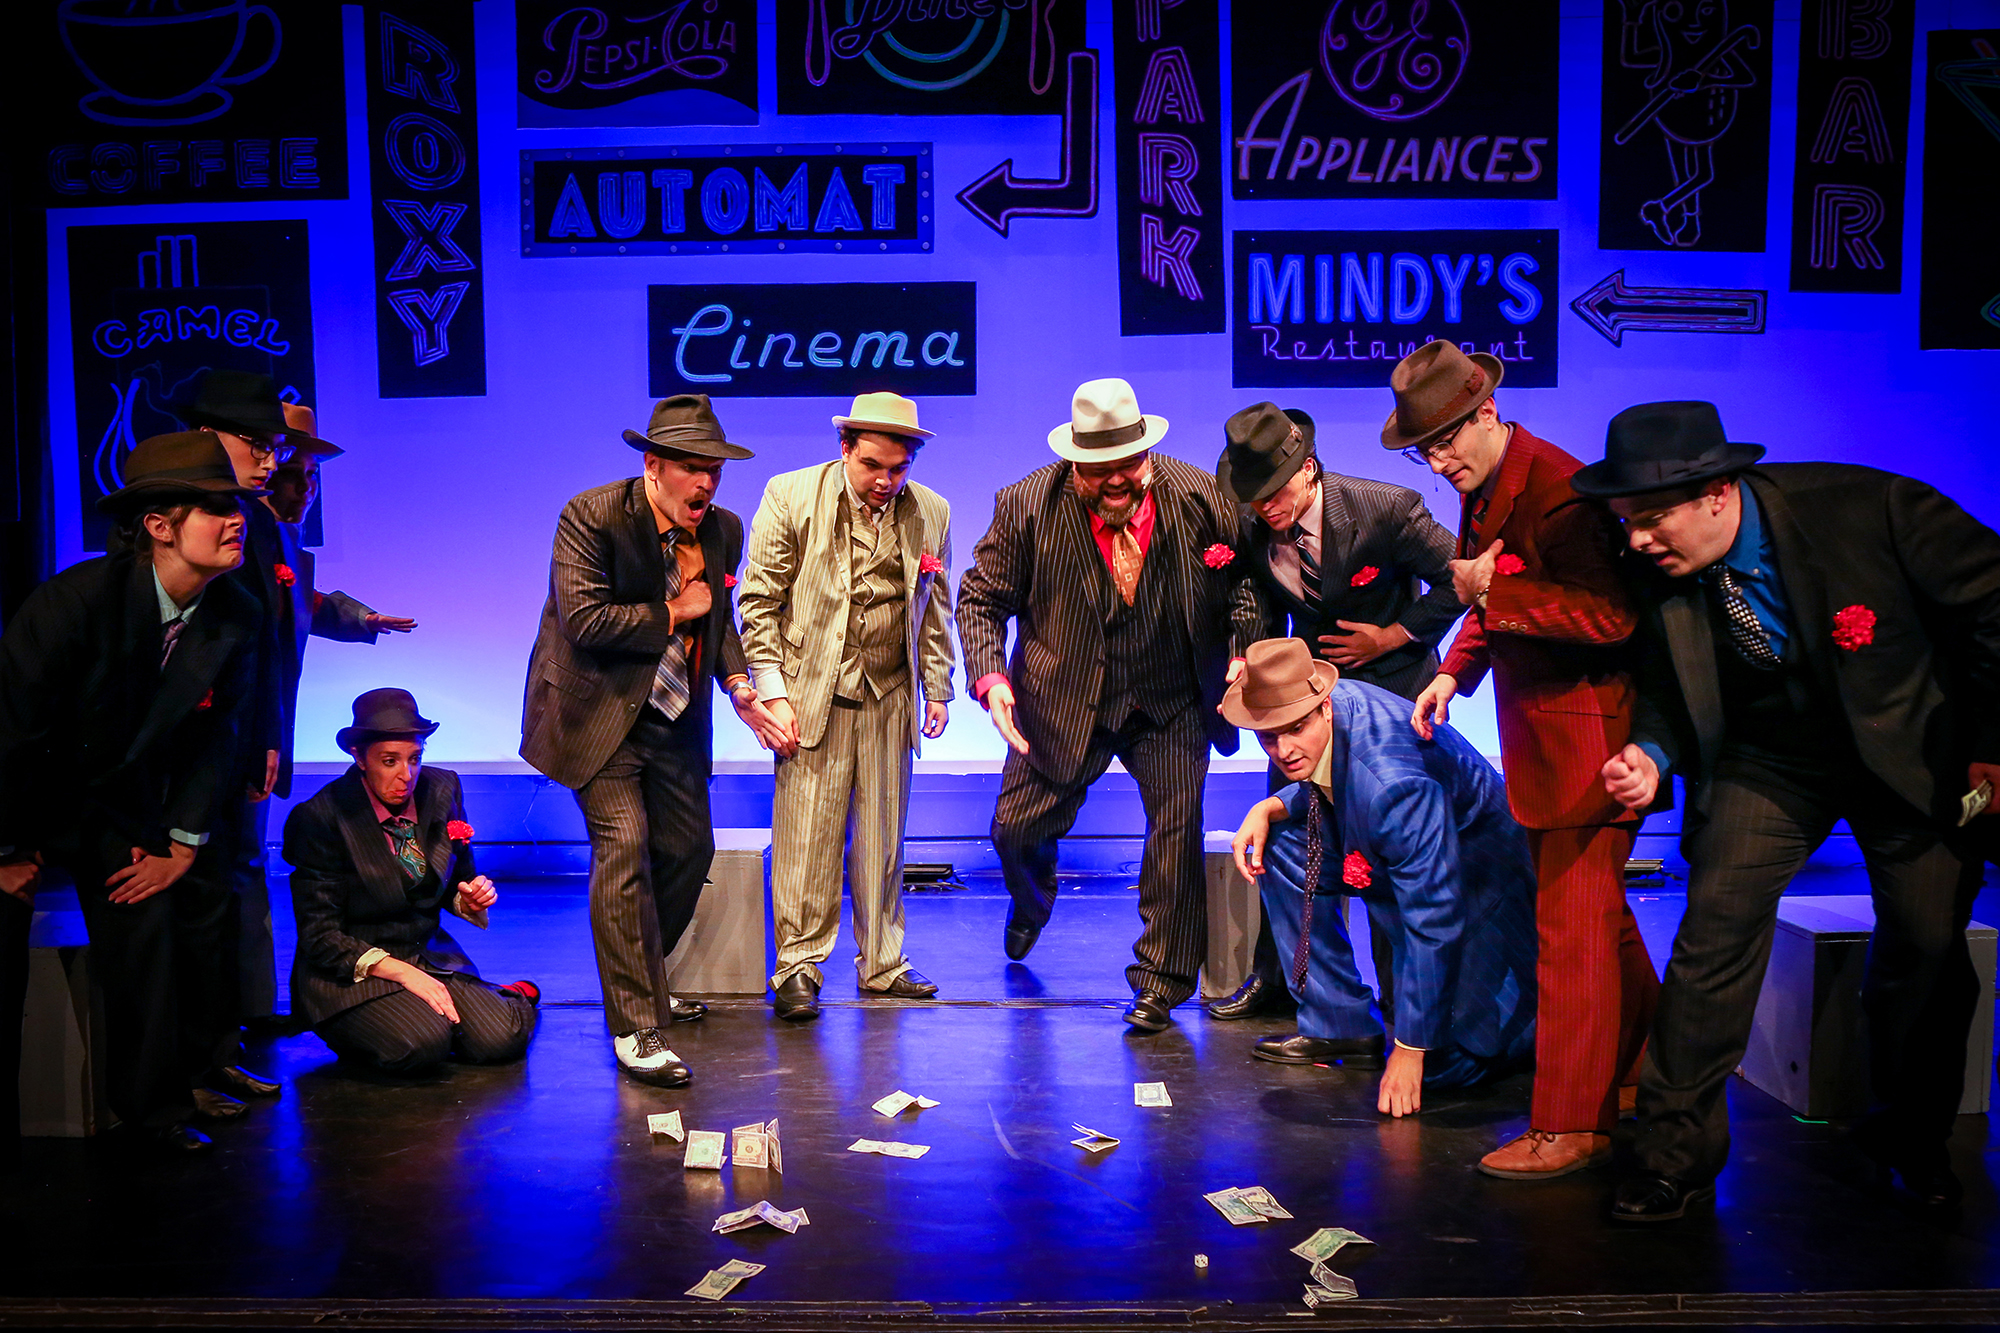 Ensemble with (middle left to right) Nathan Detroit (Joseph DeMaio), Liver Lips Louie (Aidan Falzon), Big Jule (Gary Glass), Harry the Horse (Jake McNerney), Angi the Ox (Eric Bras), Benny Southstreet